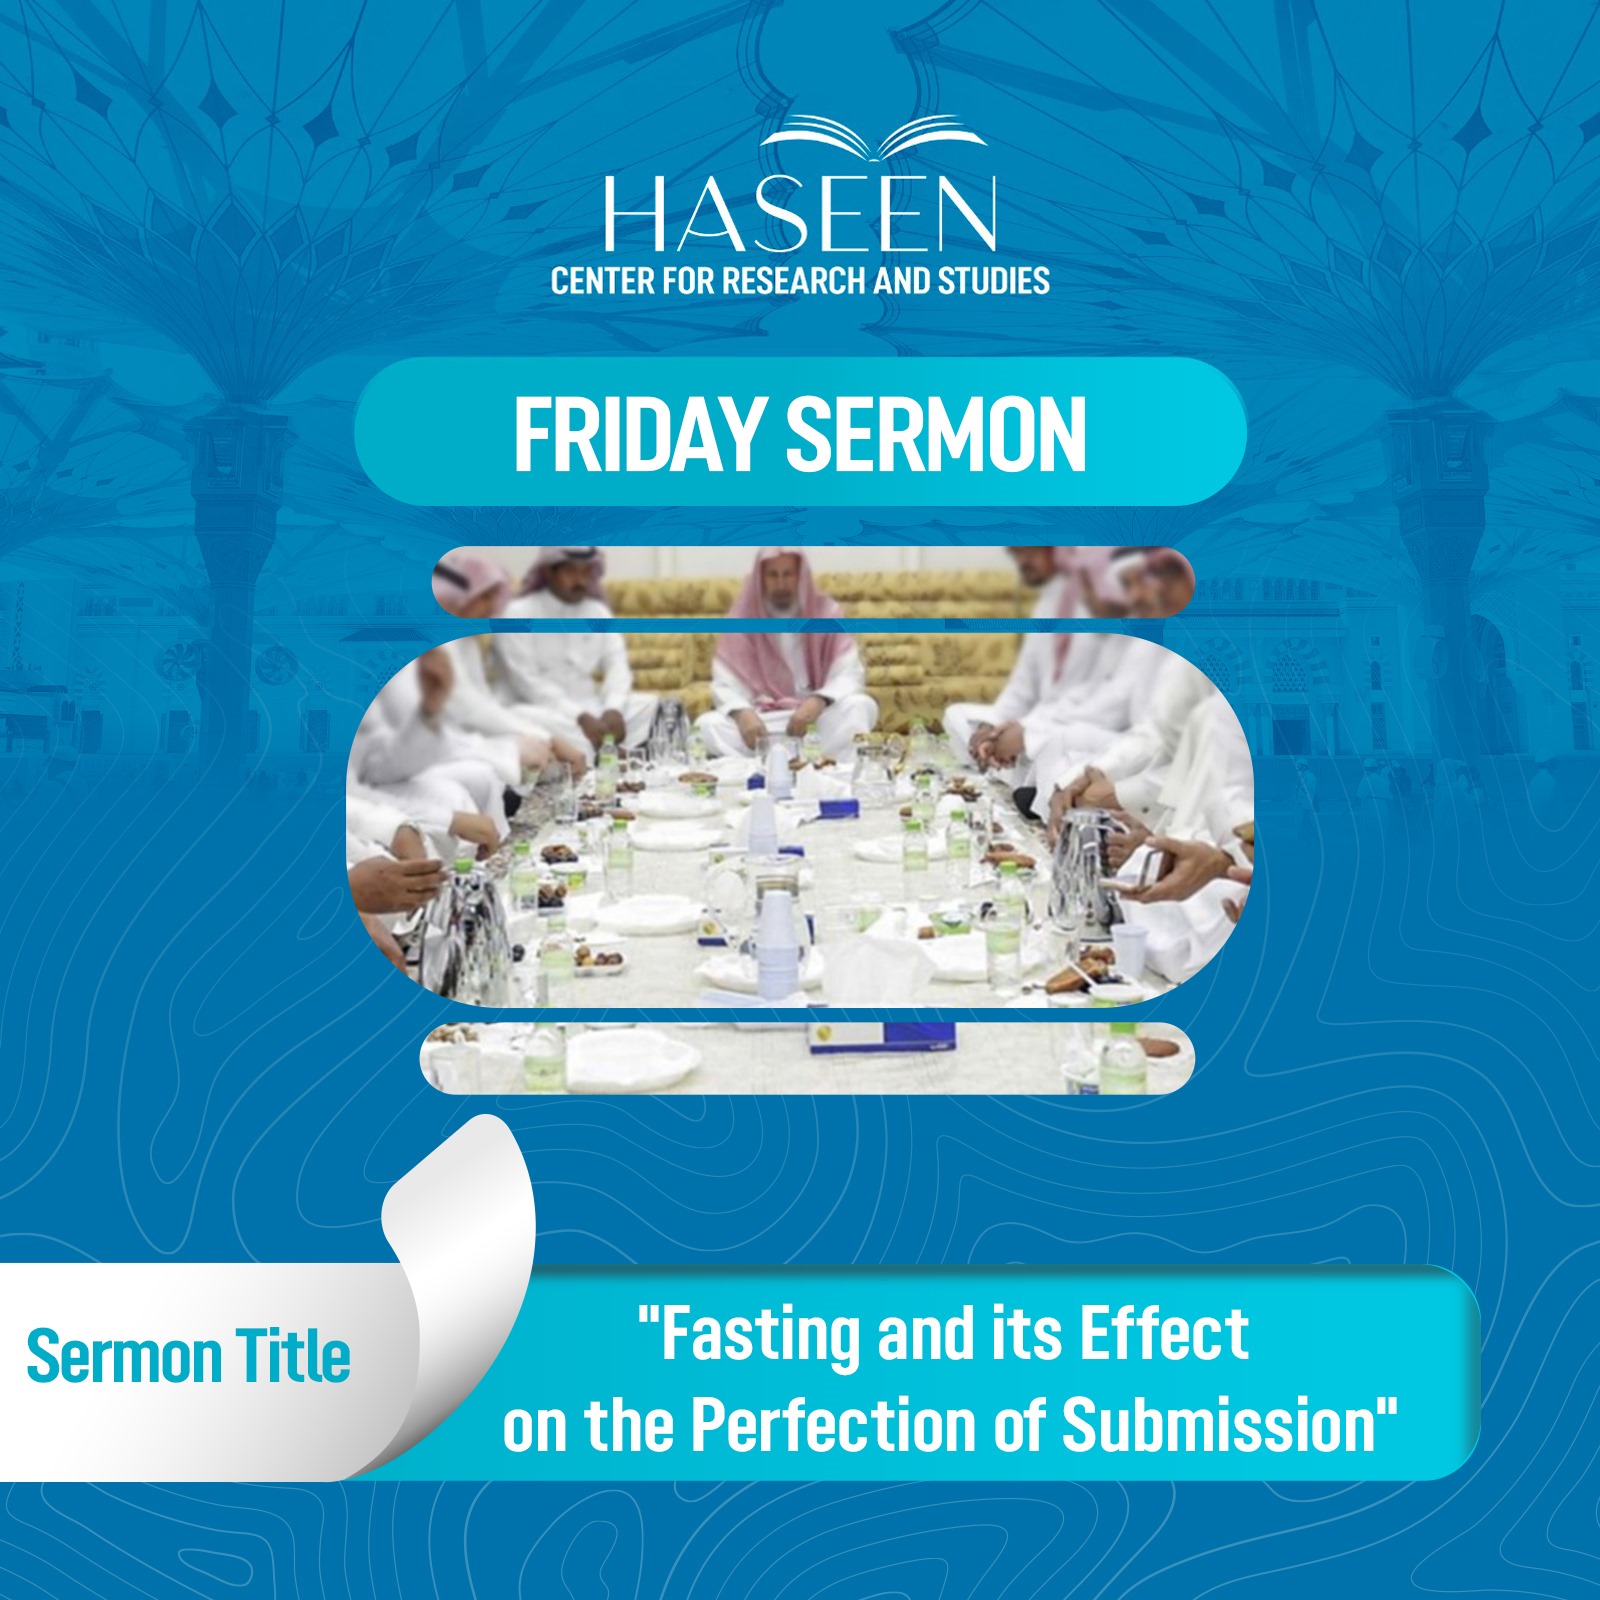 Title of Sermon: Fasting and its Effect on the Perfection of Submission